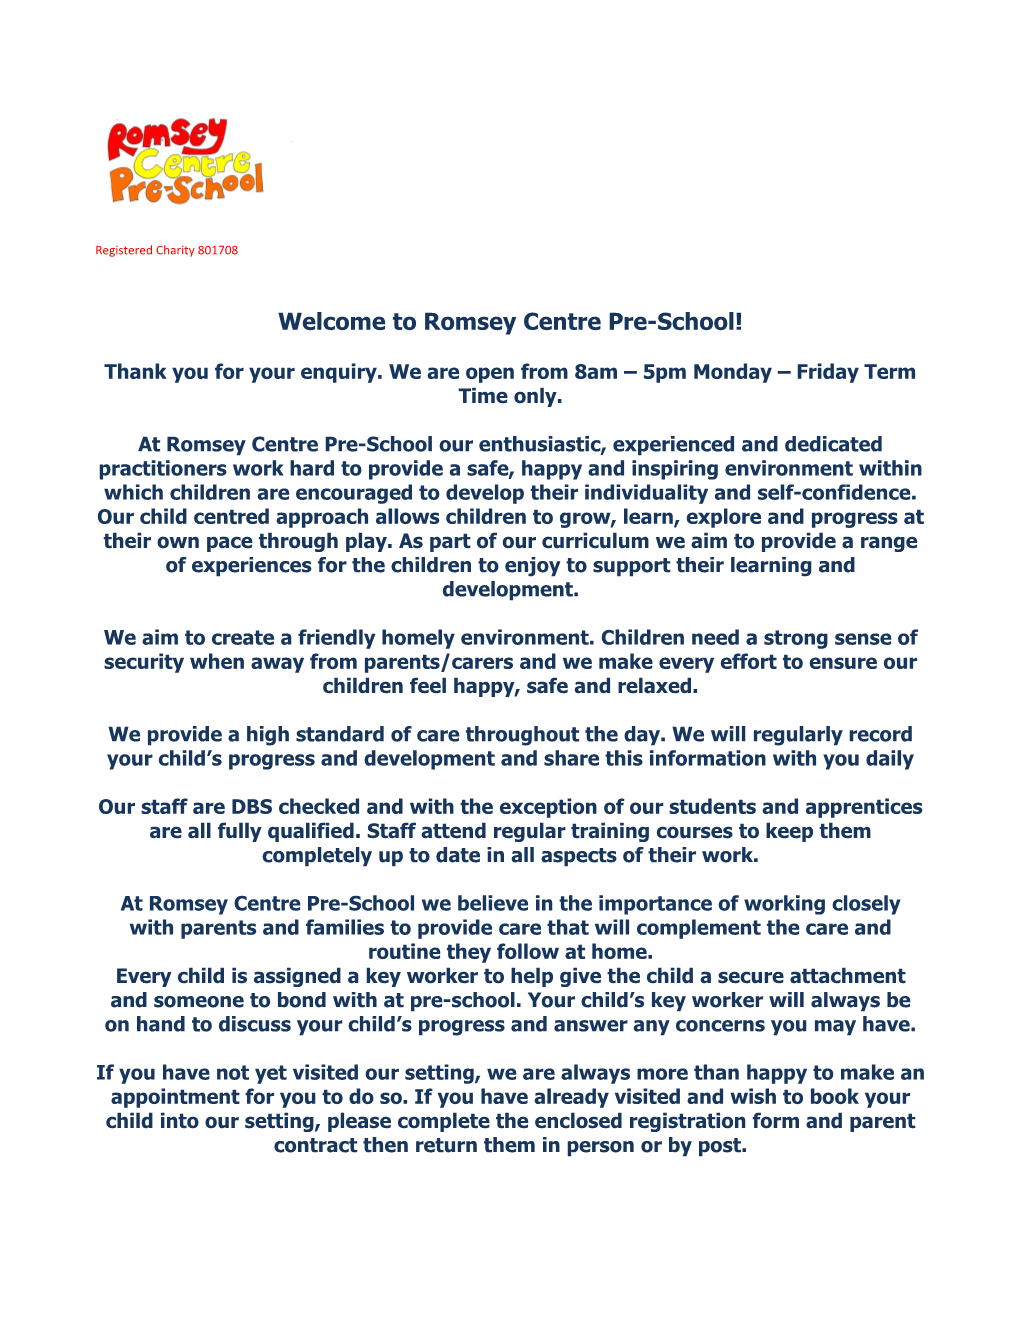 Welcome to Romsey Centre Pre-School!